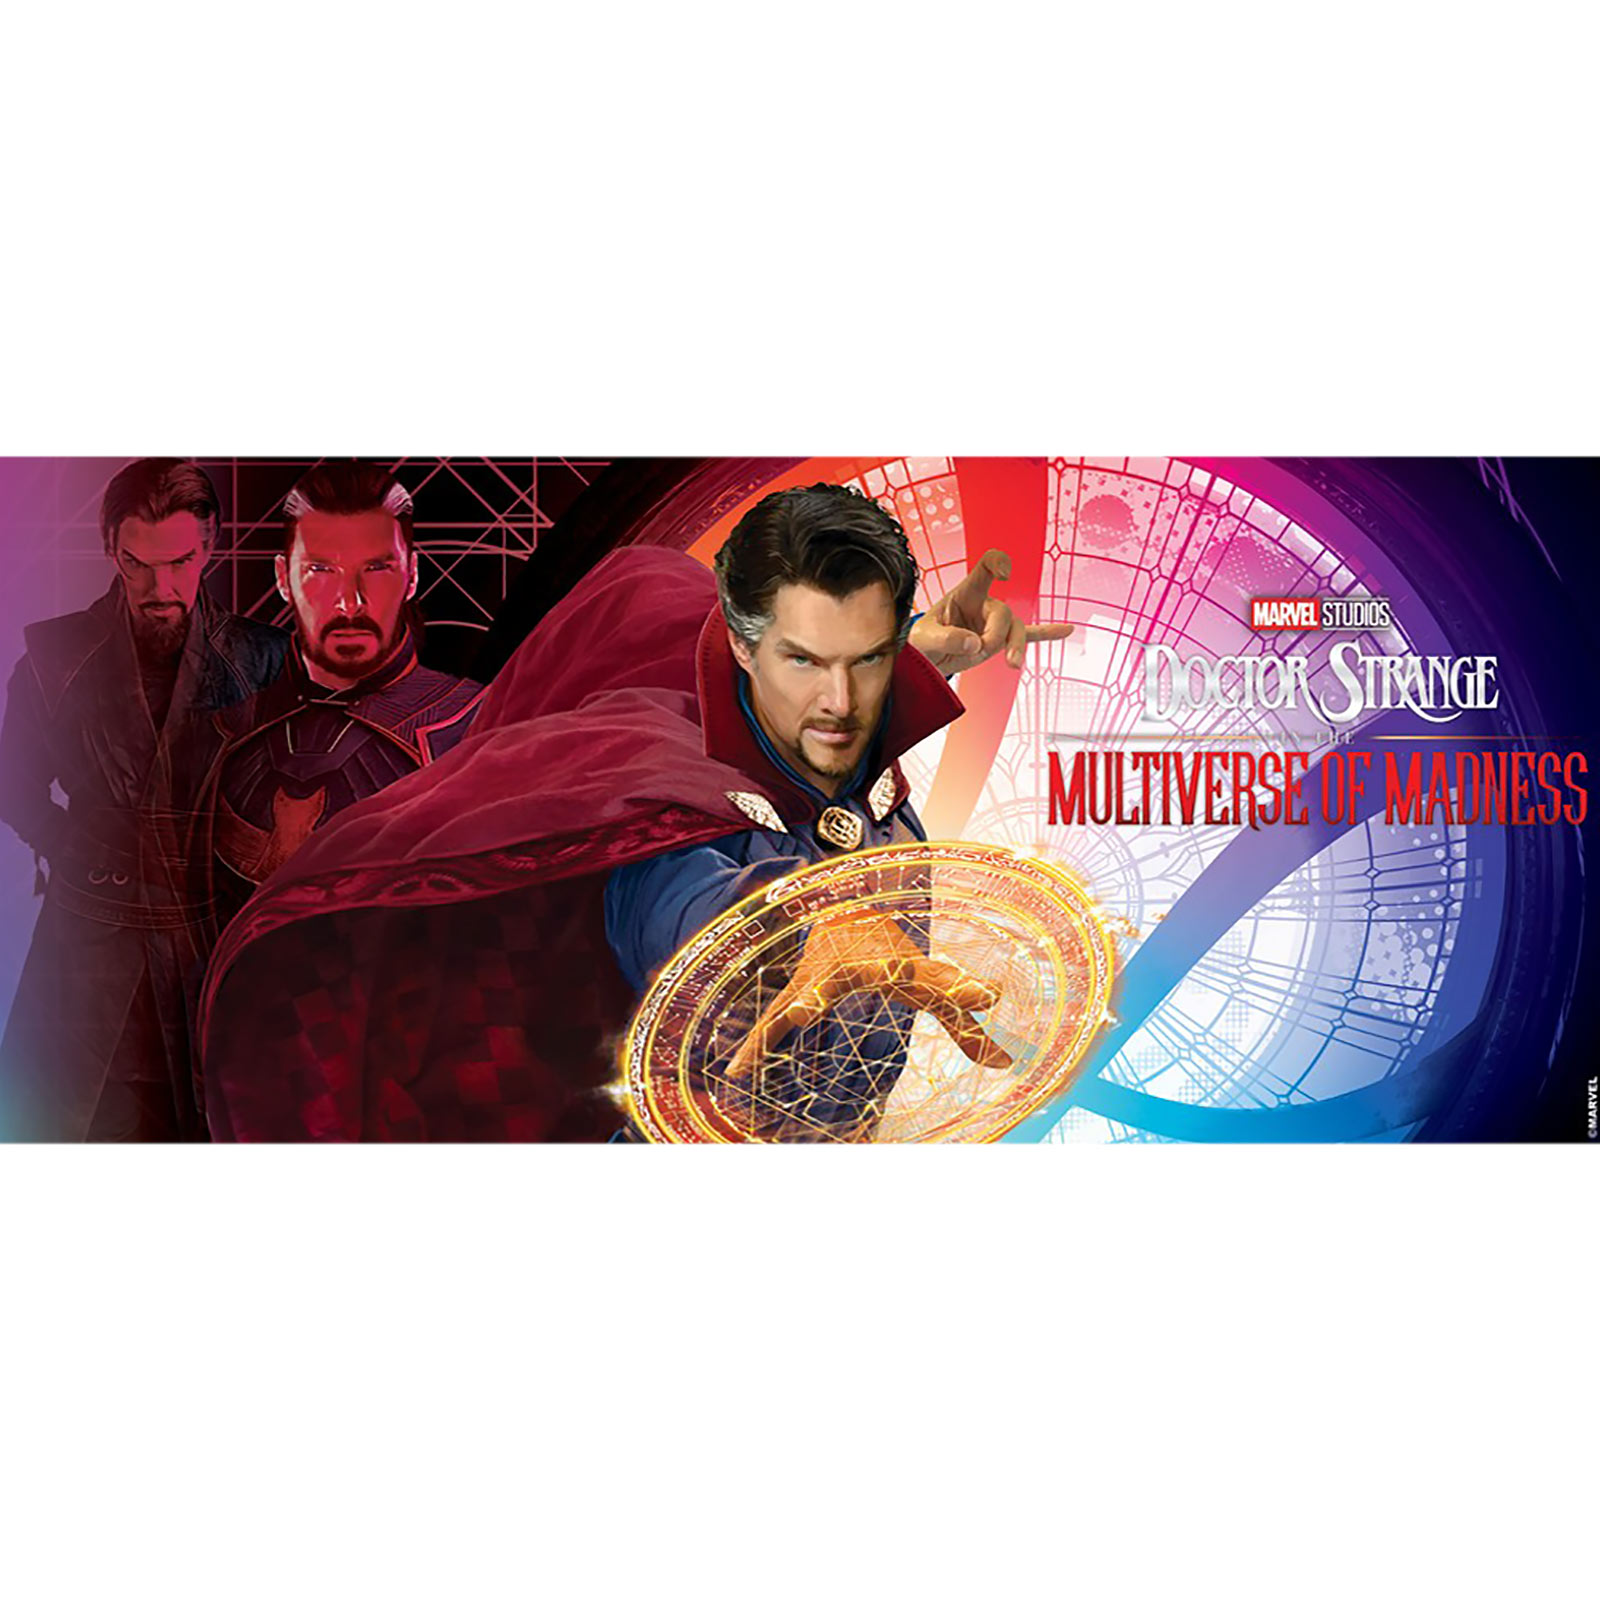 Doctor Strange - The Multiverse Cup